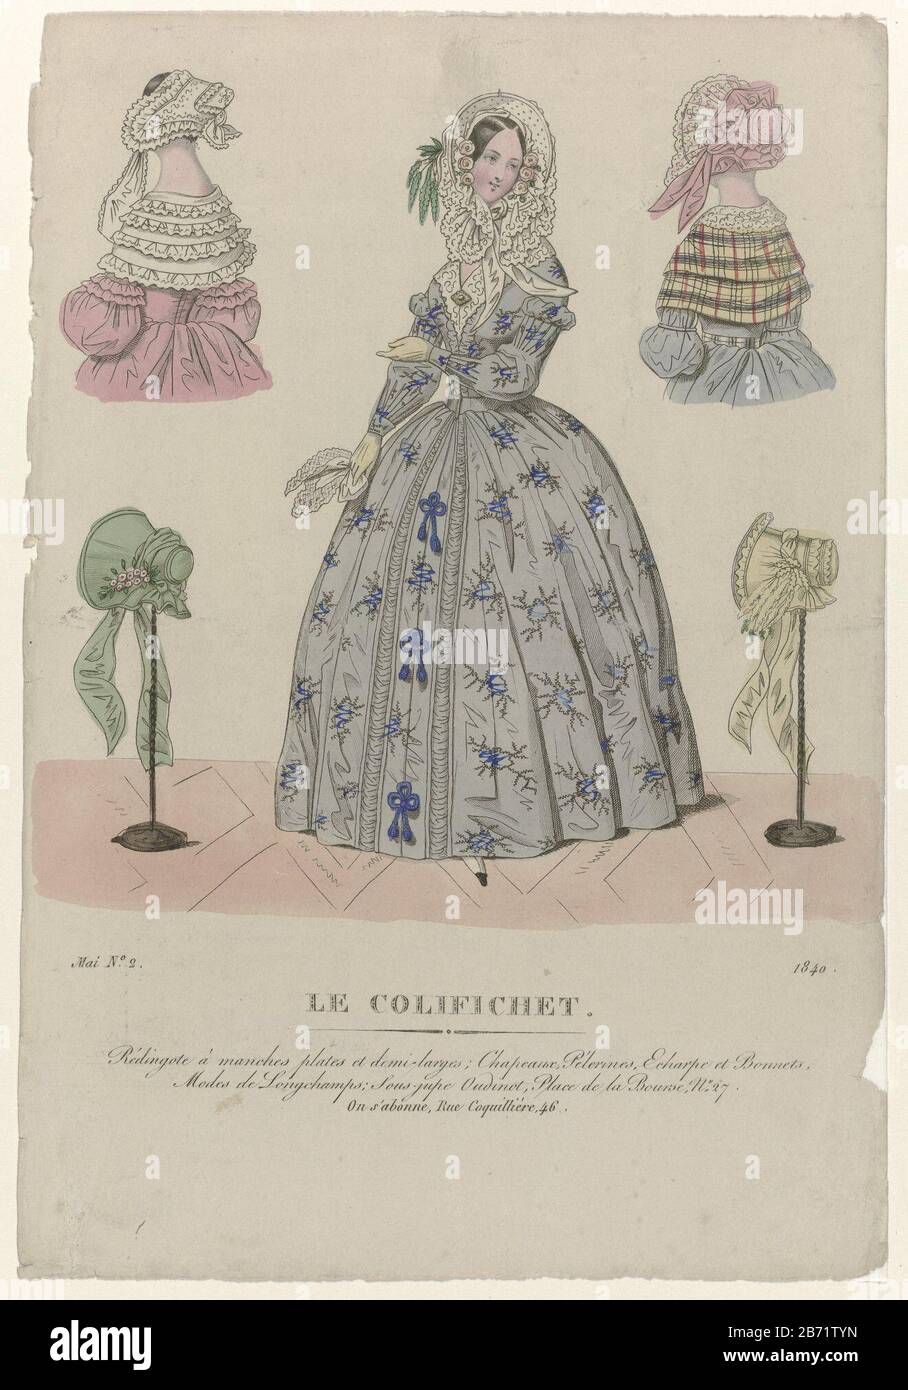 Standing woman and four examples of hats, pelerines, scarf and hat.  According to the caption: Redingote low sleeves, puffed sleeve top and long  pleated sleeves. Hats, pelerines, scarves and hats. "Modes de